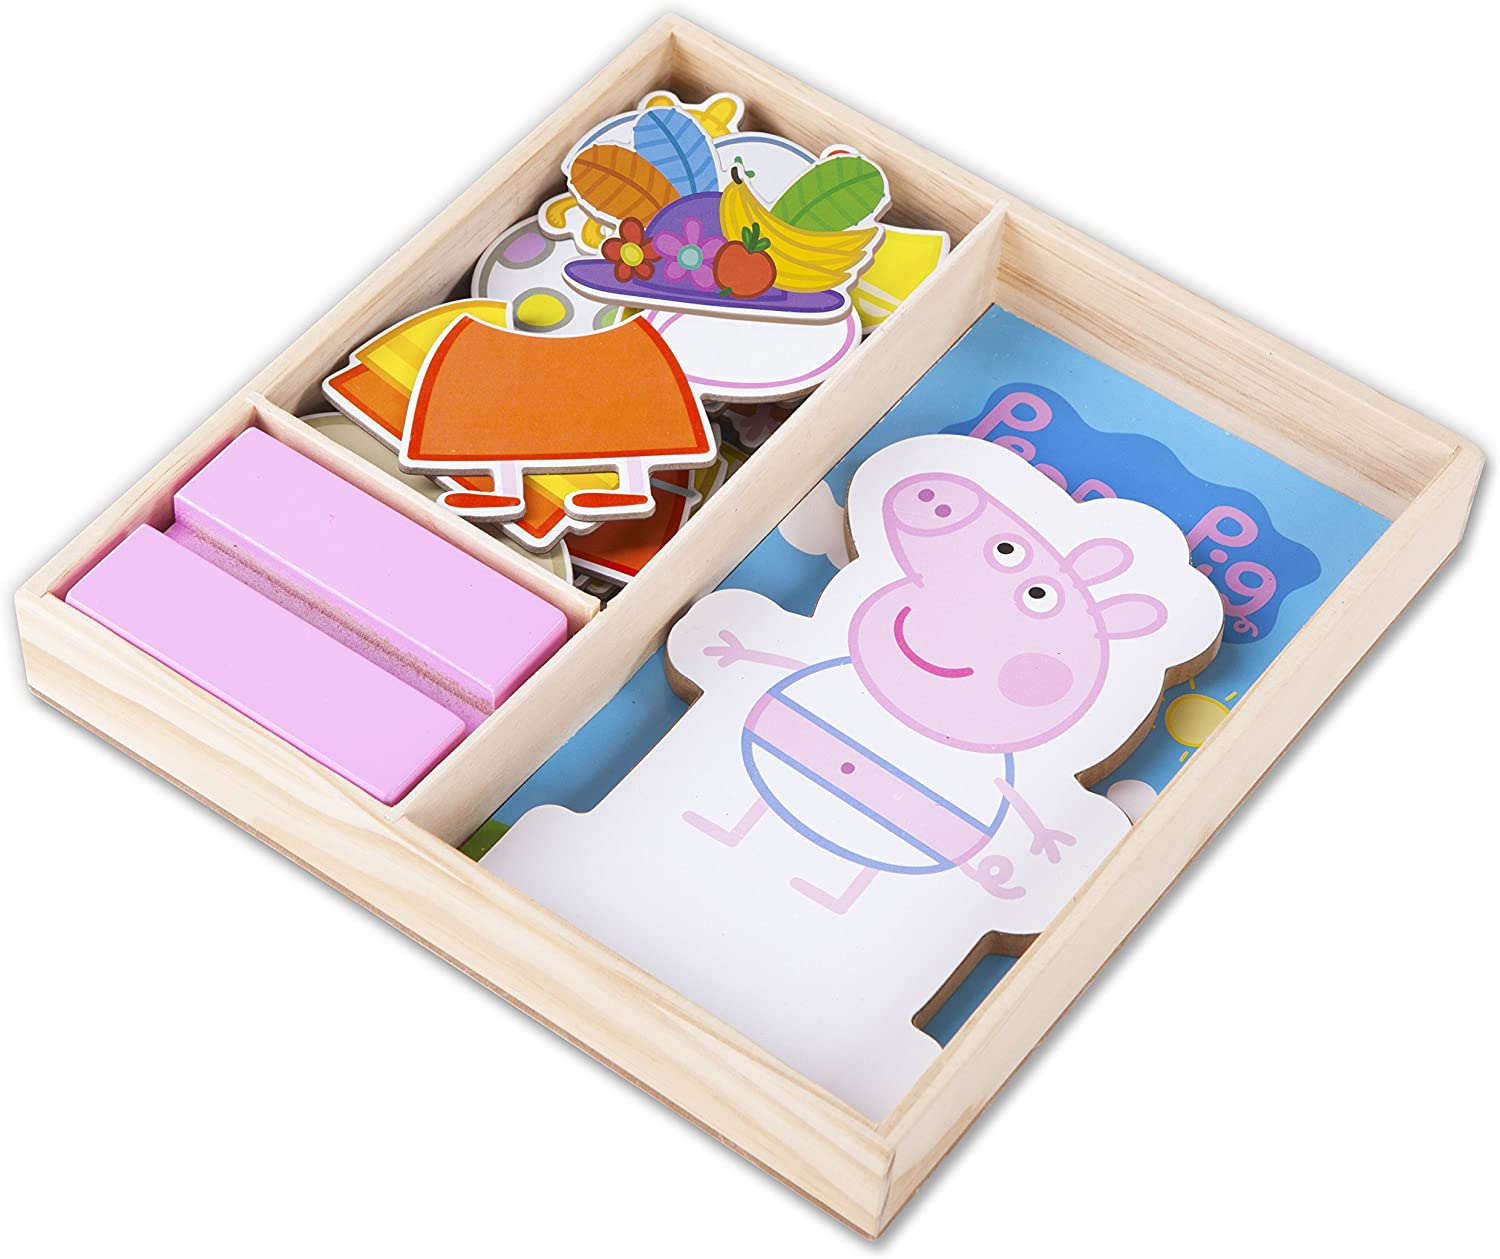 Peppa Pig Magnetic Wood Dress Up Puzzle